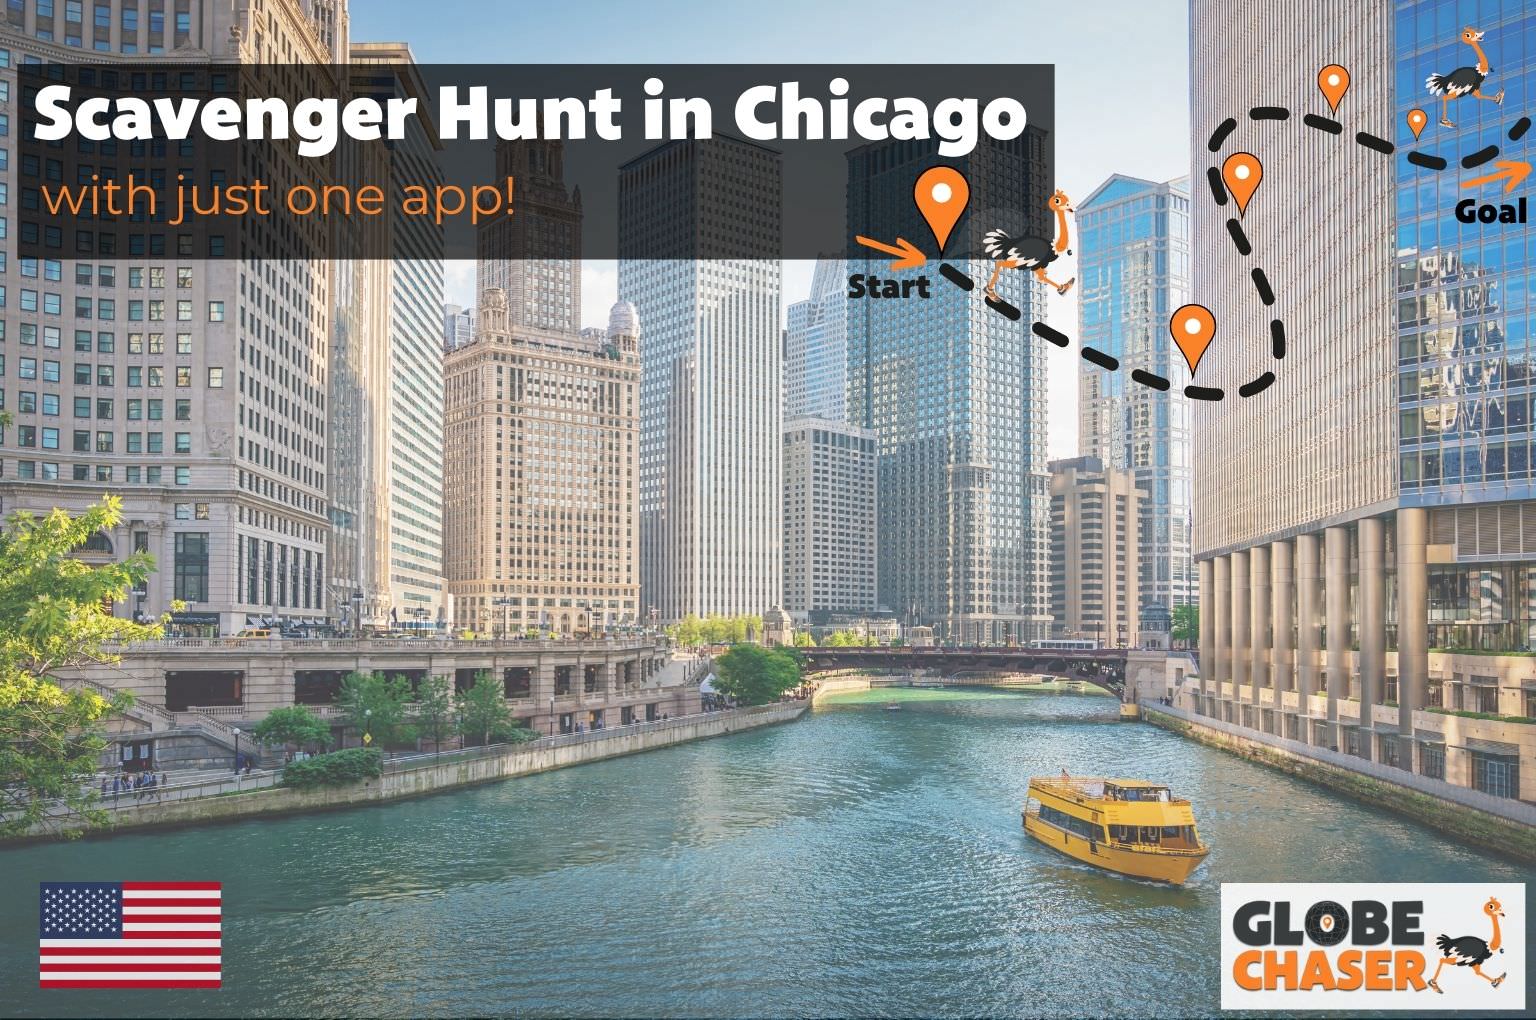 Scavenger Hunt in Chicago, USA - Family Activities with the Globe Chaser App for Outdoor Fun